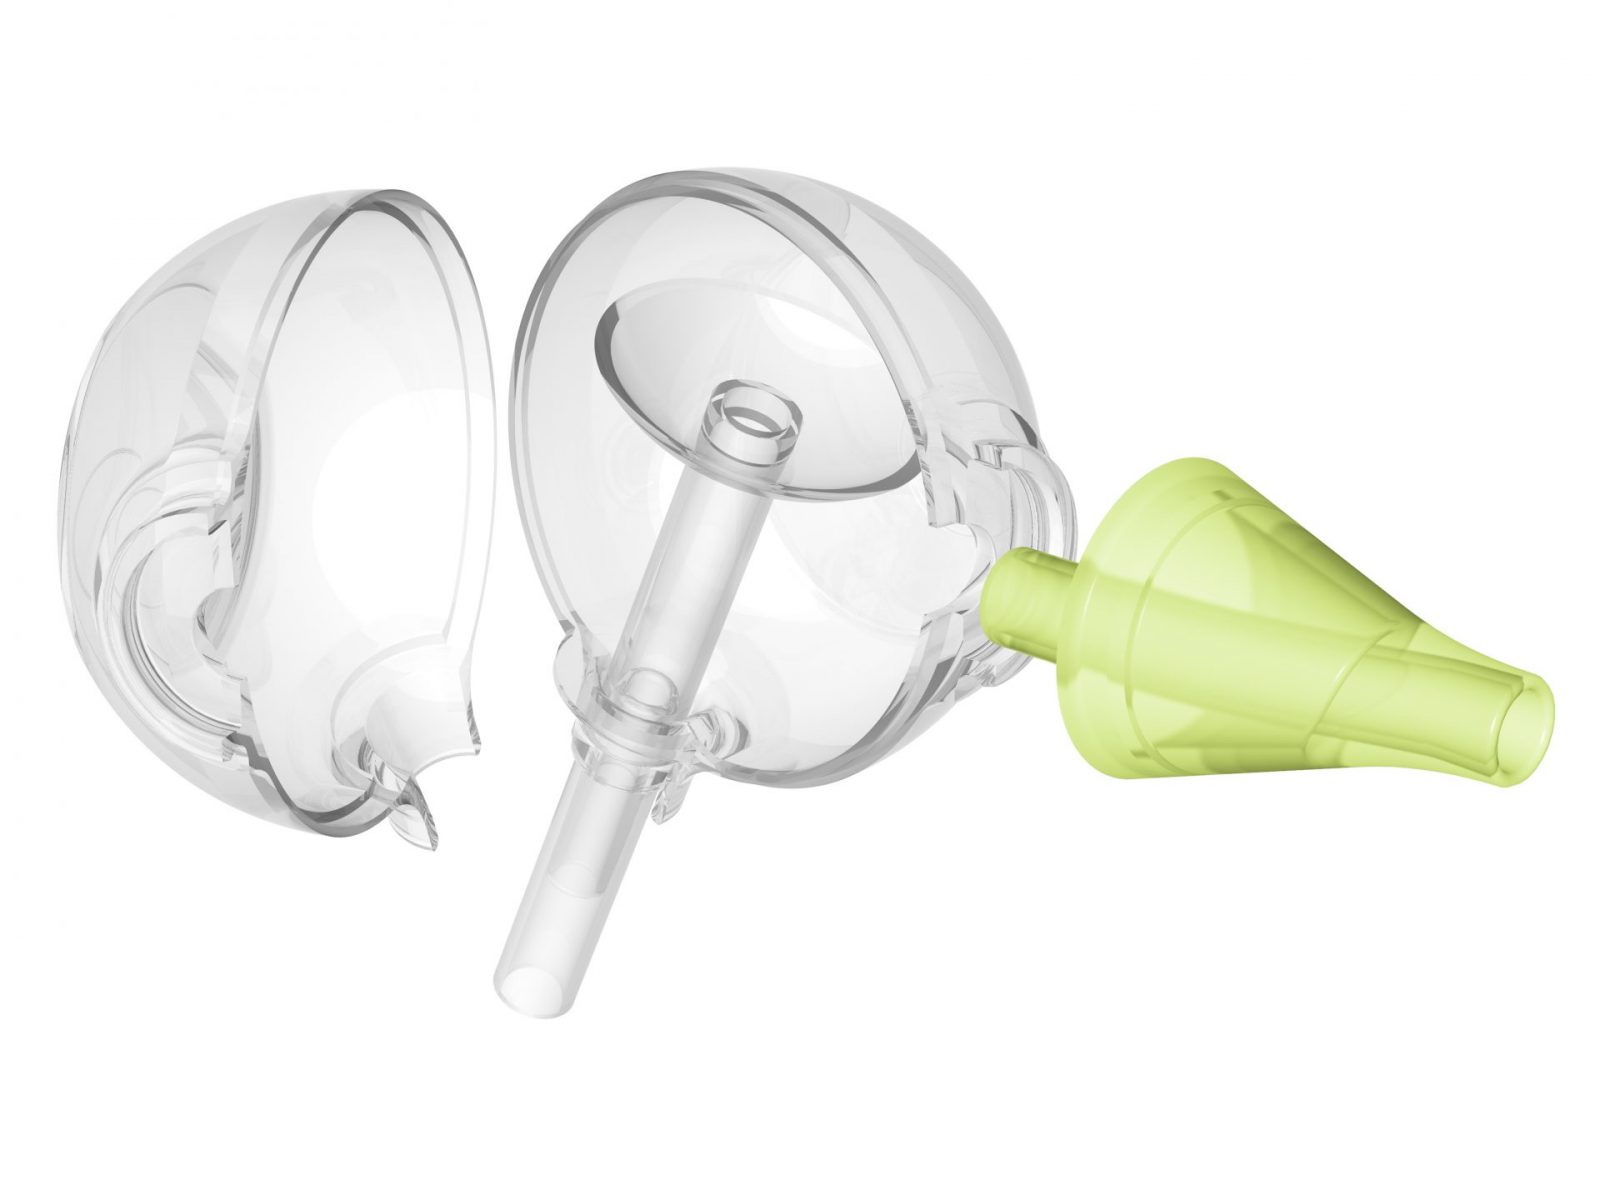 The construction of the Colibri head in which the nasal secretion is collected in the Nosiboo Pro and Nosiboo Eco nasal aspirators